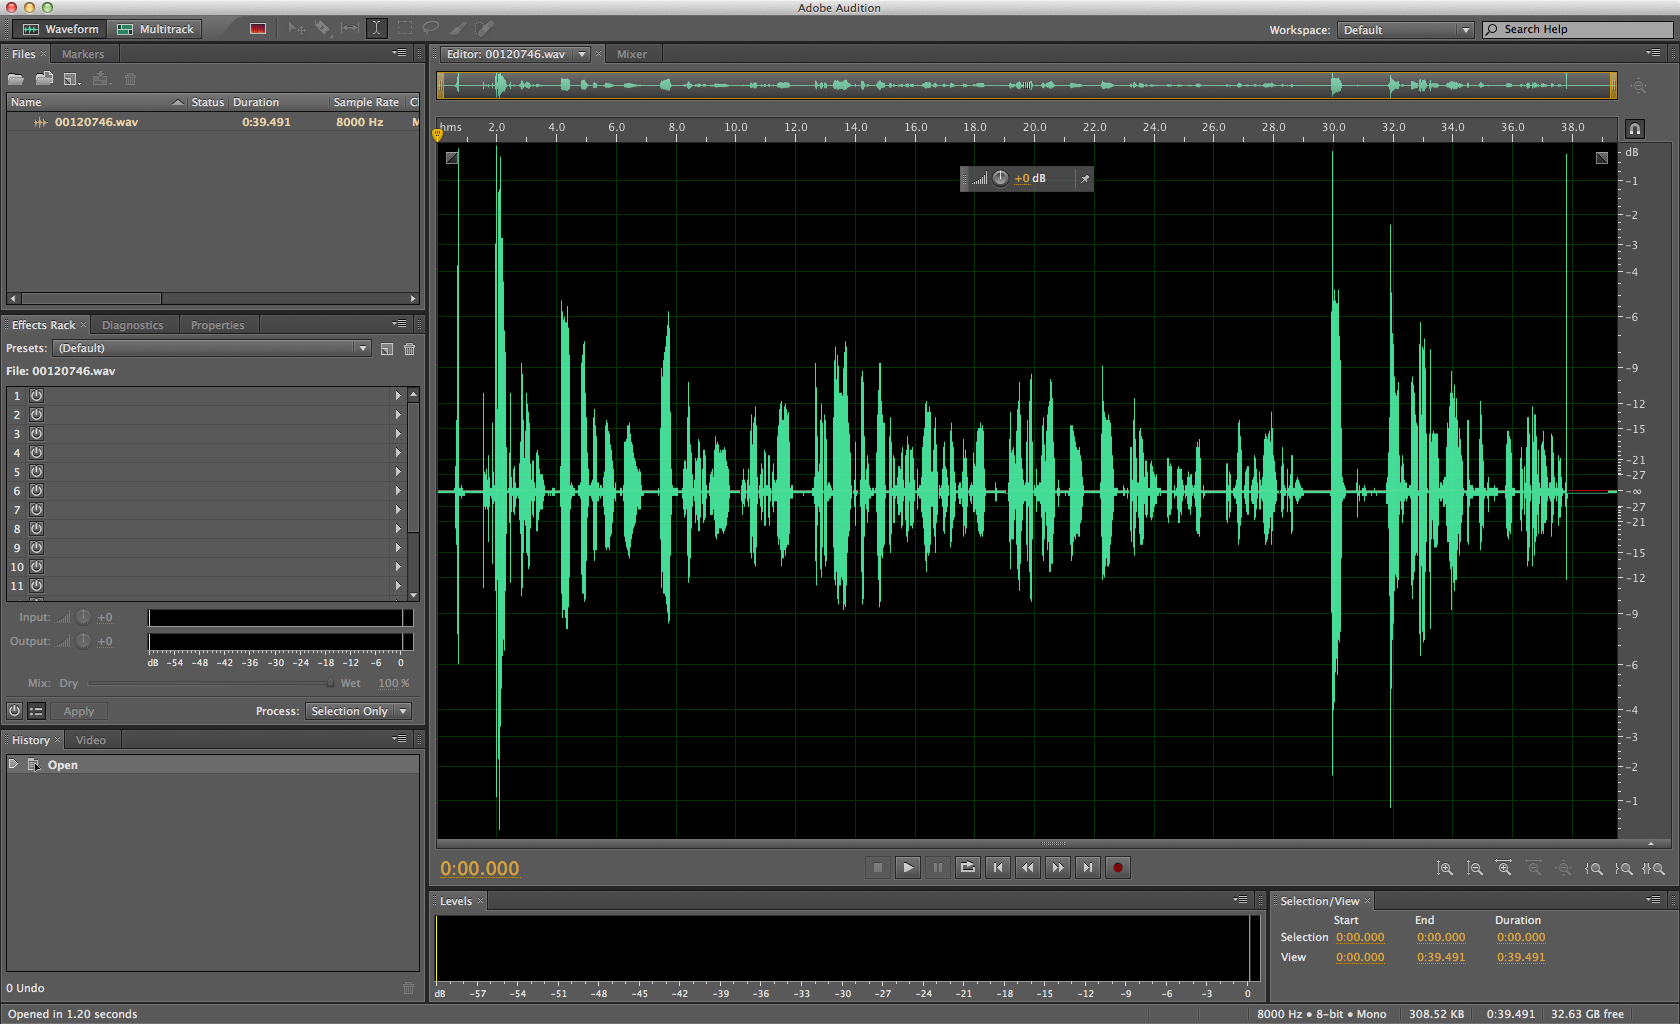 adobe audition 1.5 software free download full version